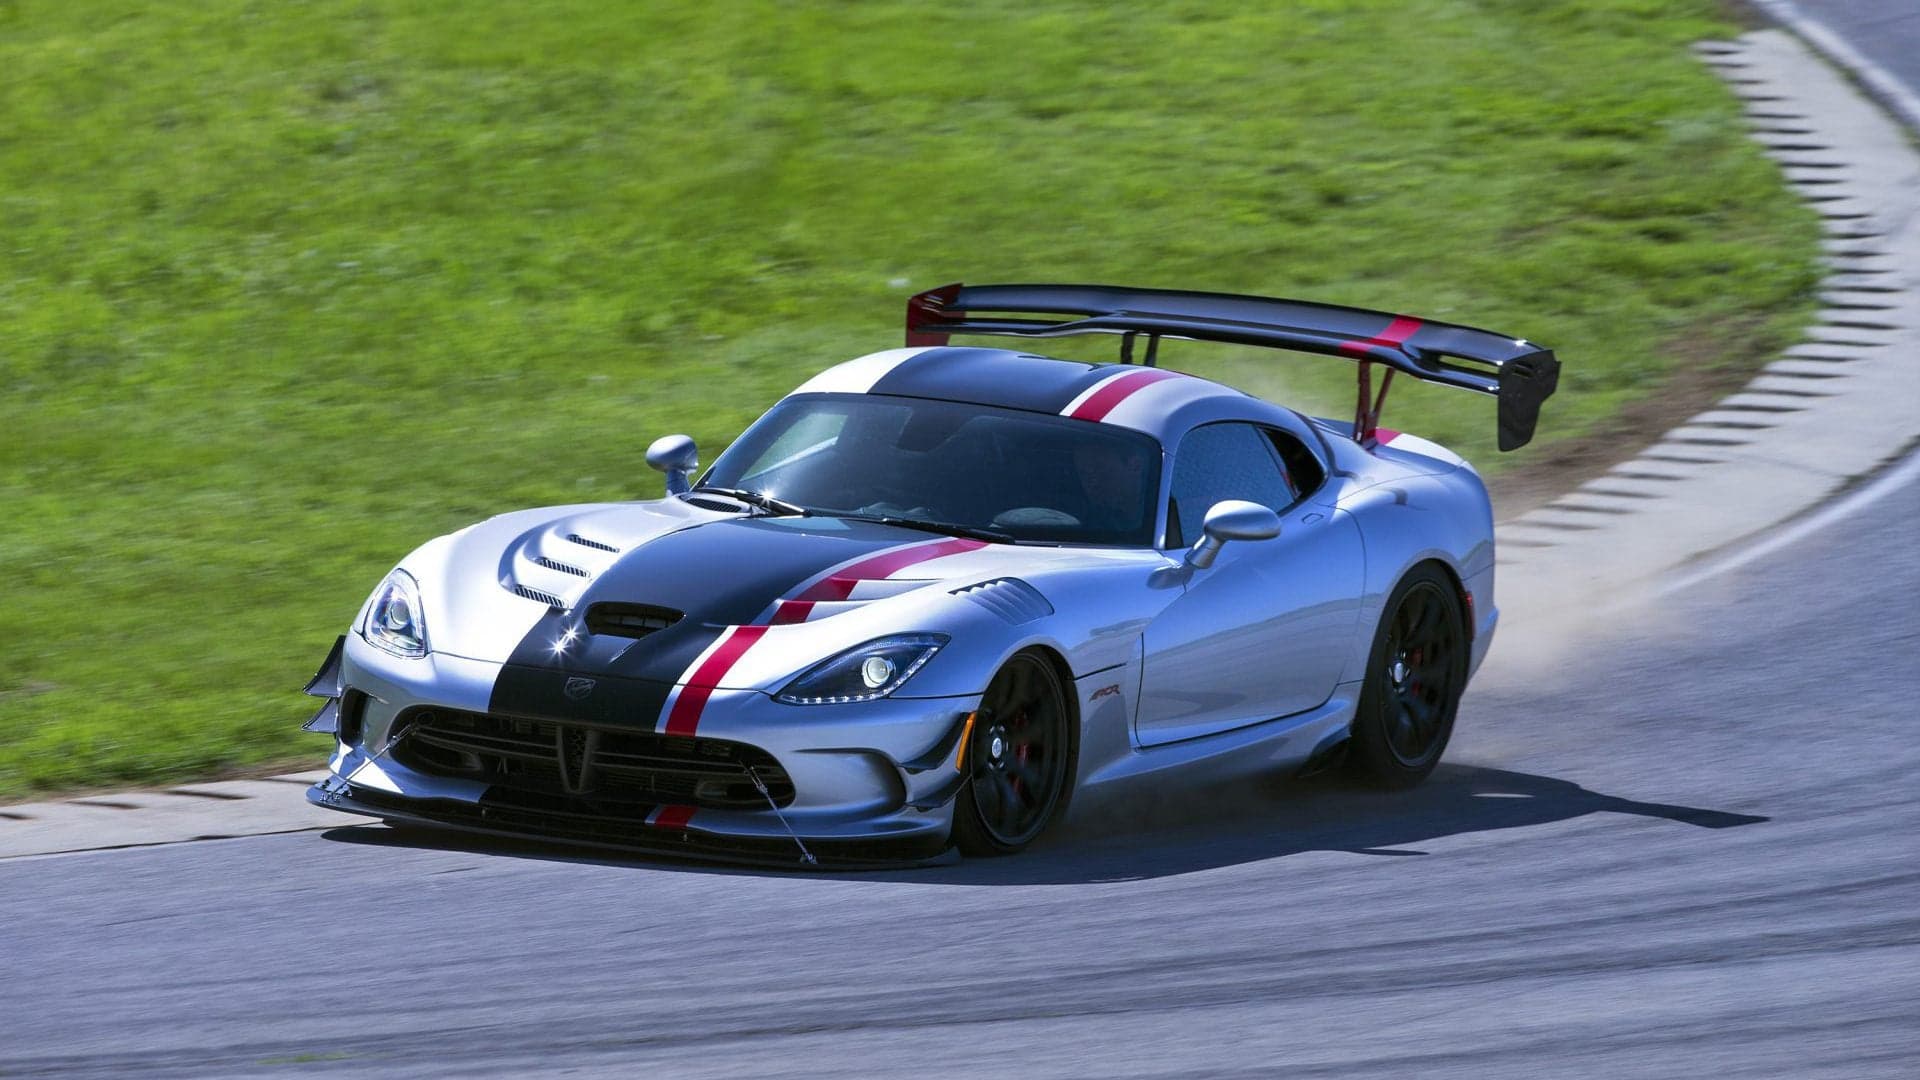 FCA Boss Sergio Marchionne Says New Dodge Viper ‘Not in the Plan’